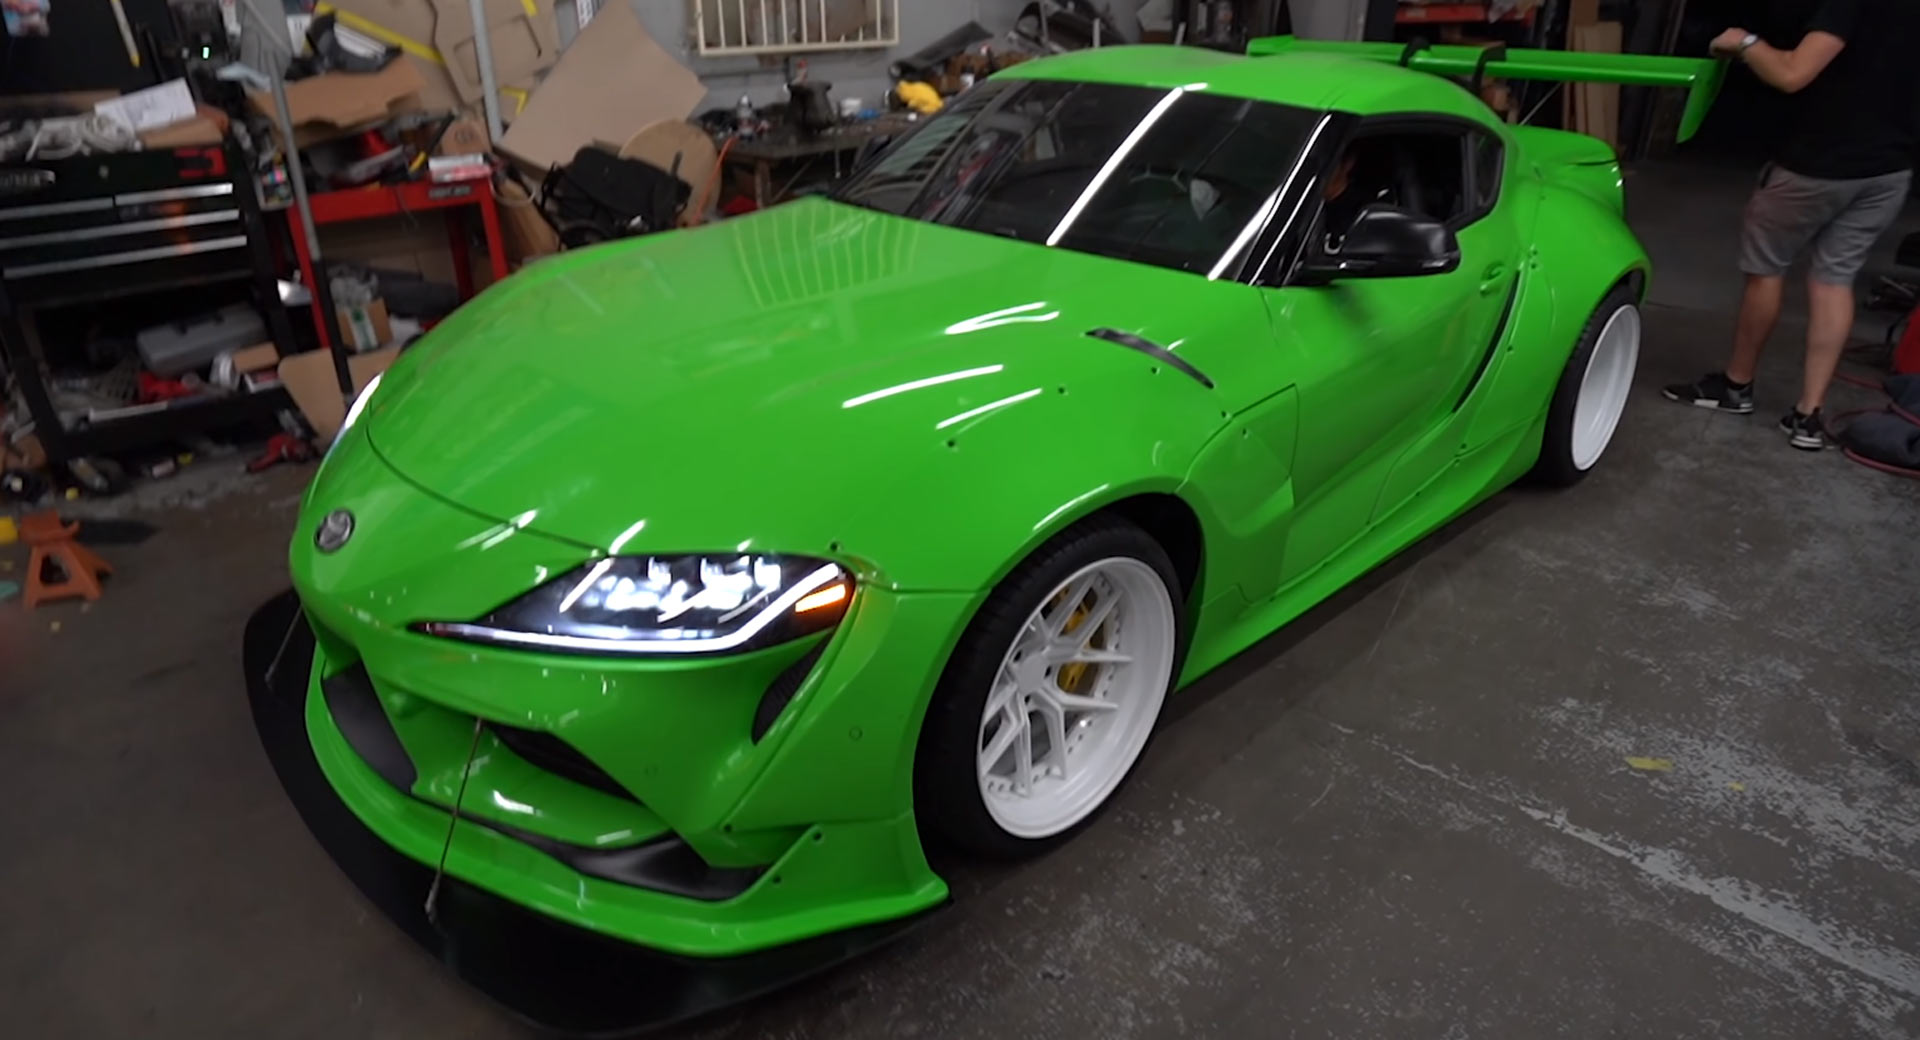 Widebody 2020 Toyota Supra From Rocket Bunny Looks Like A Time Attack Racer  | Carscoops